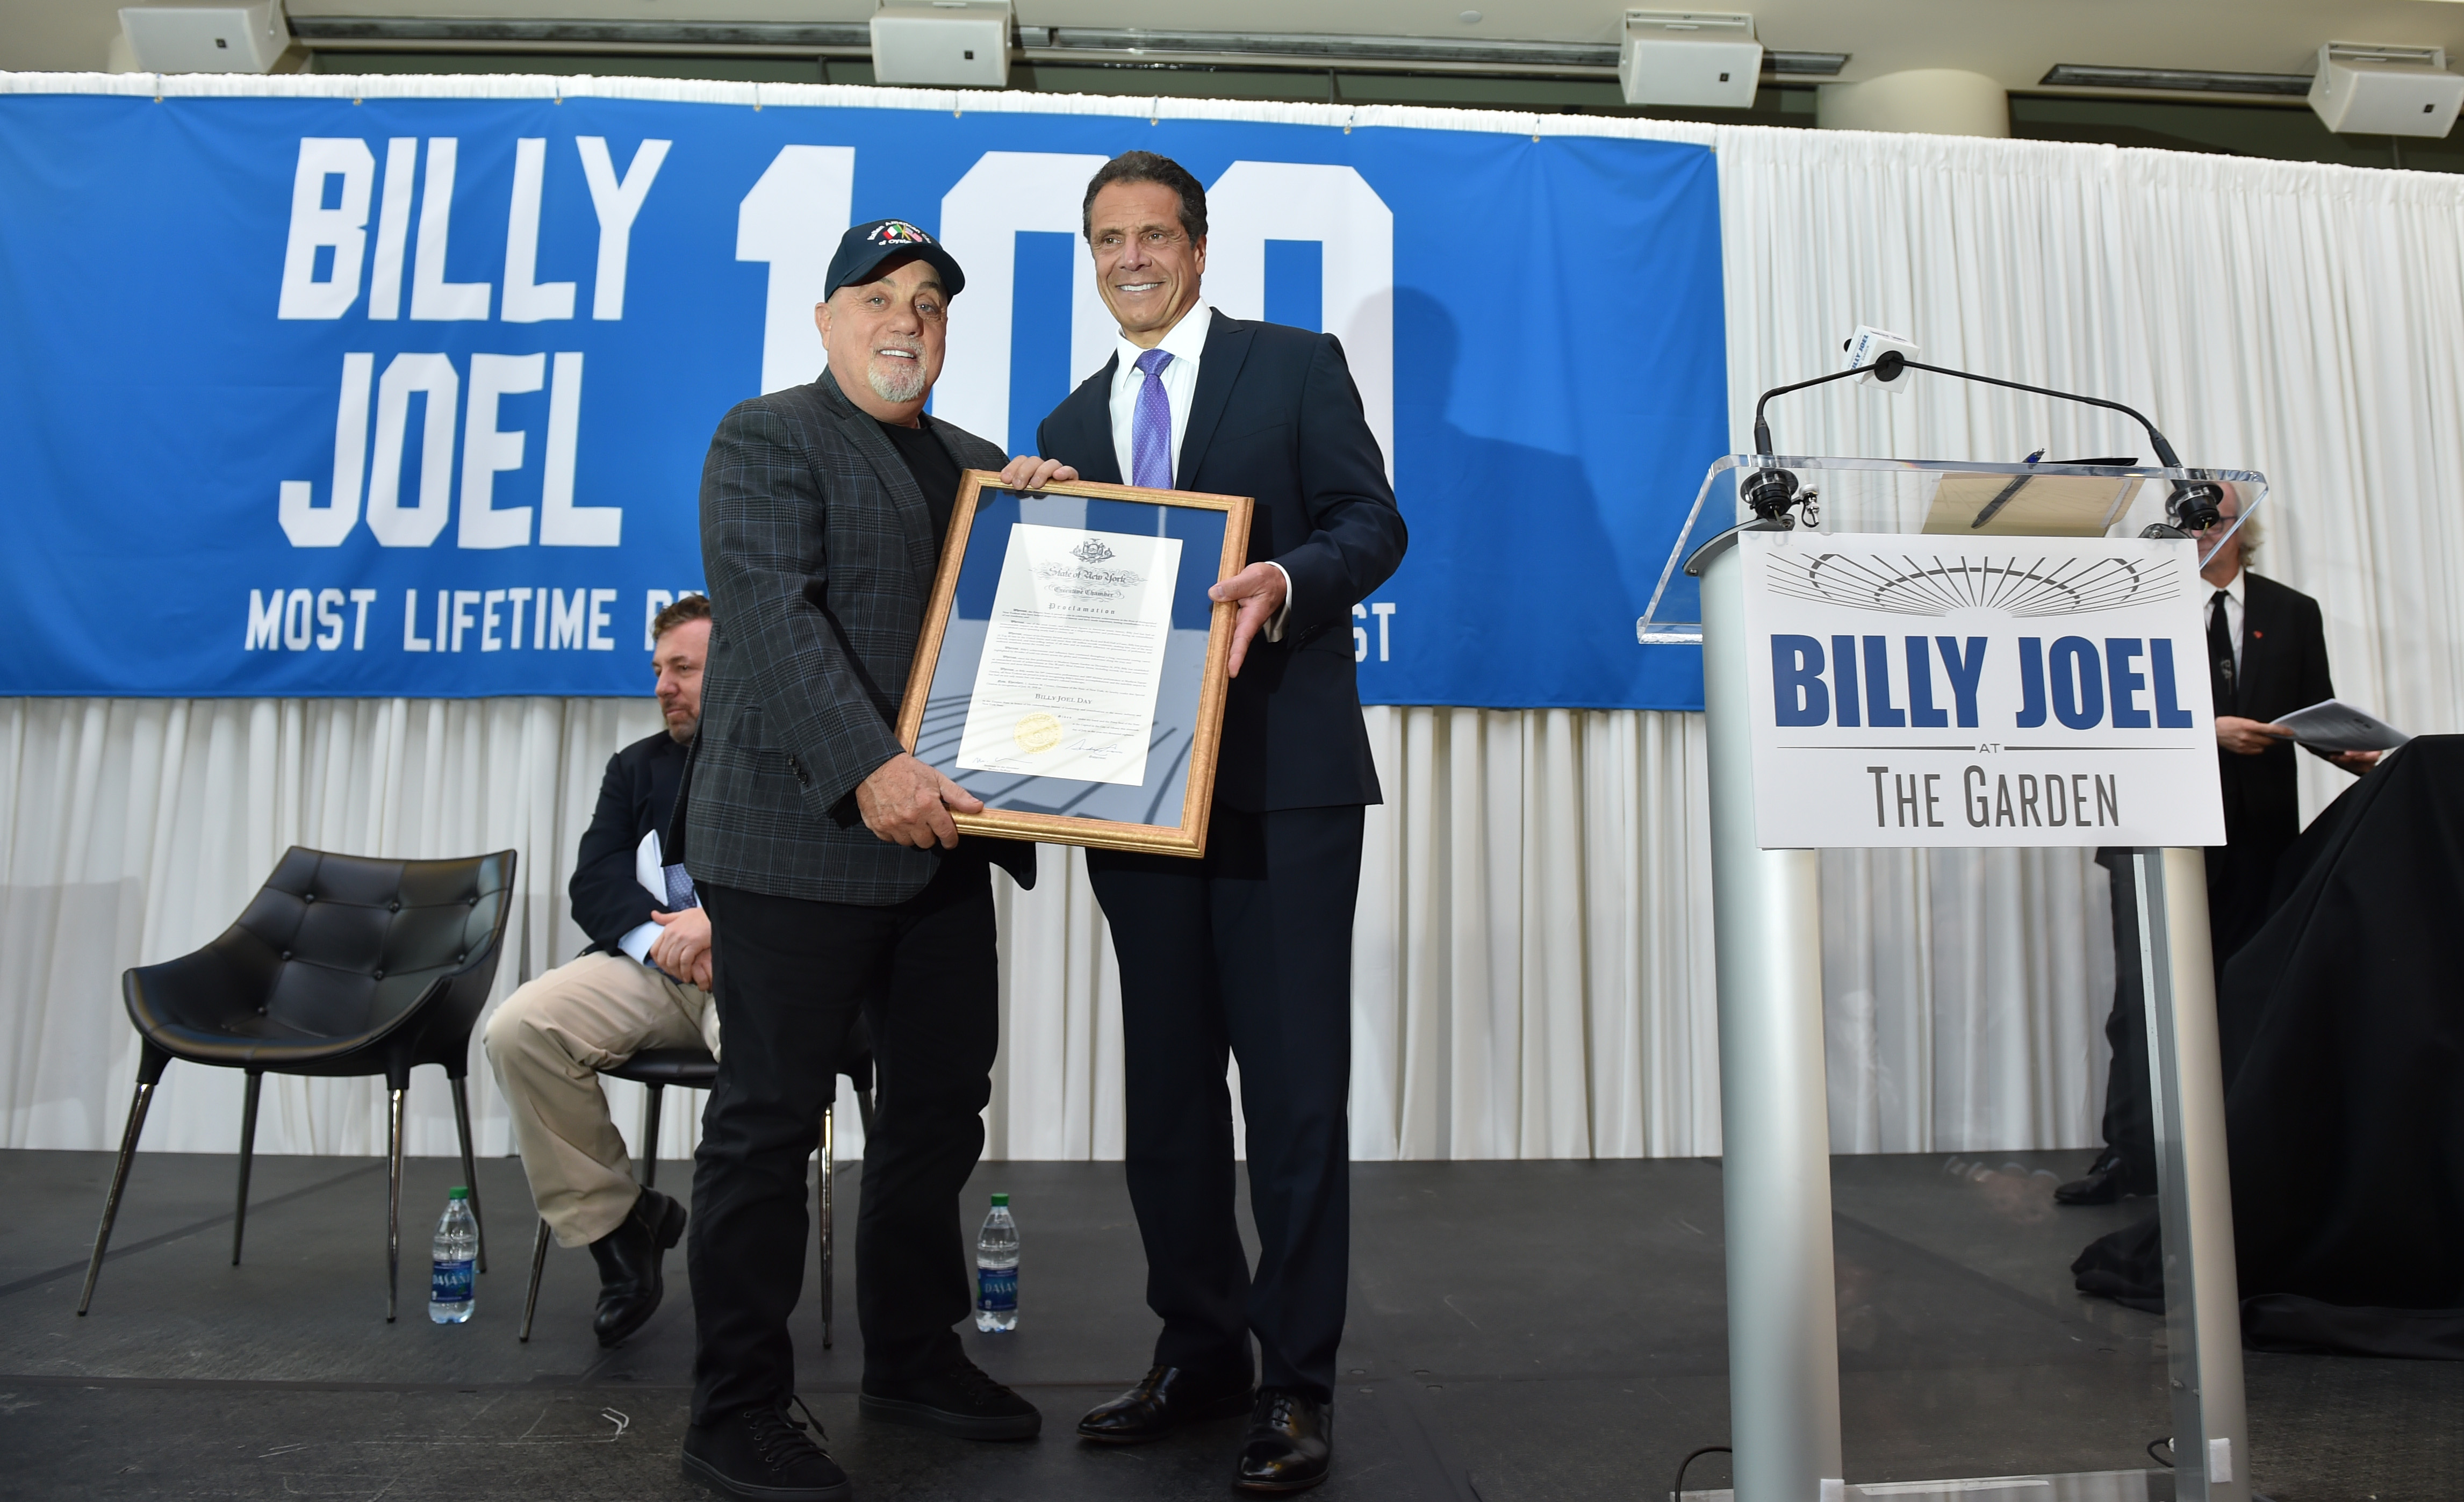 July 18 proclaimed Billy Joel Day in New York State